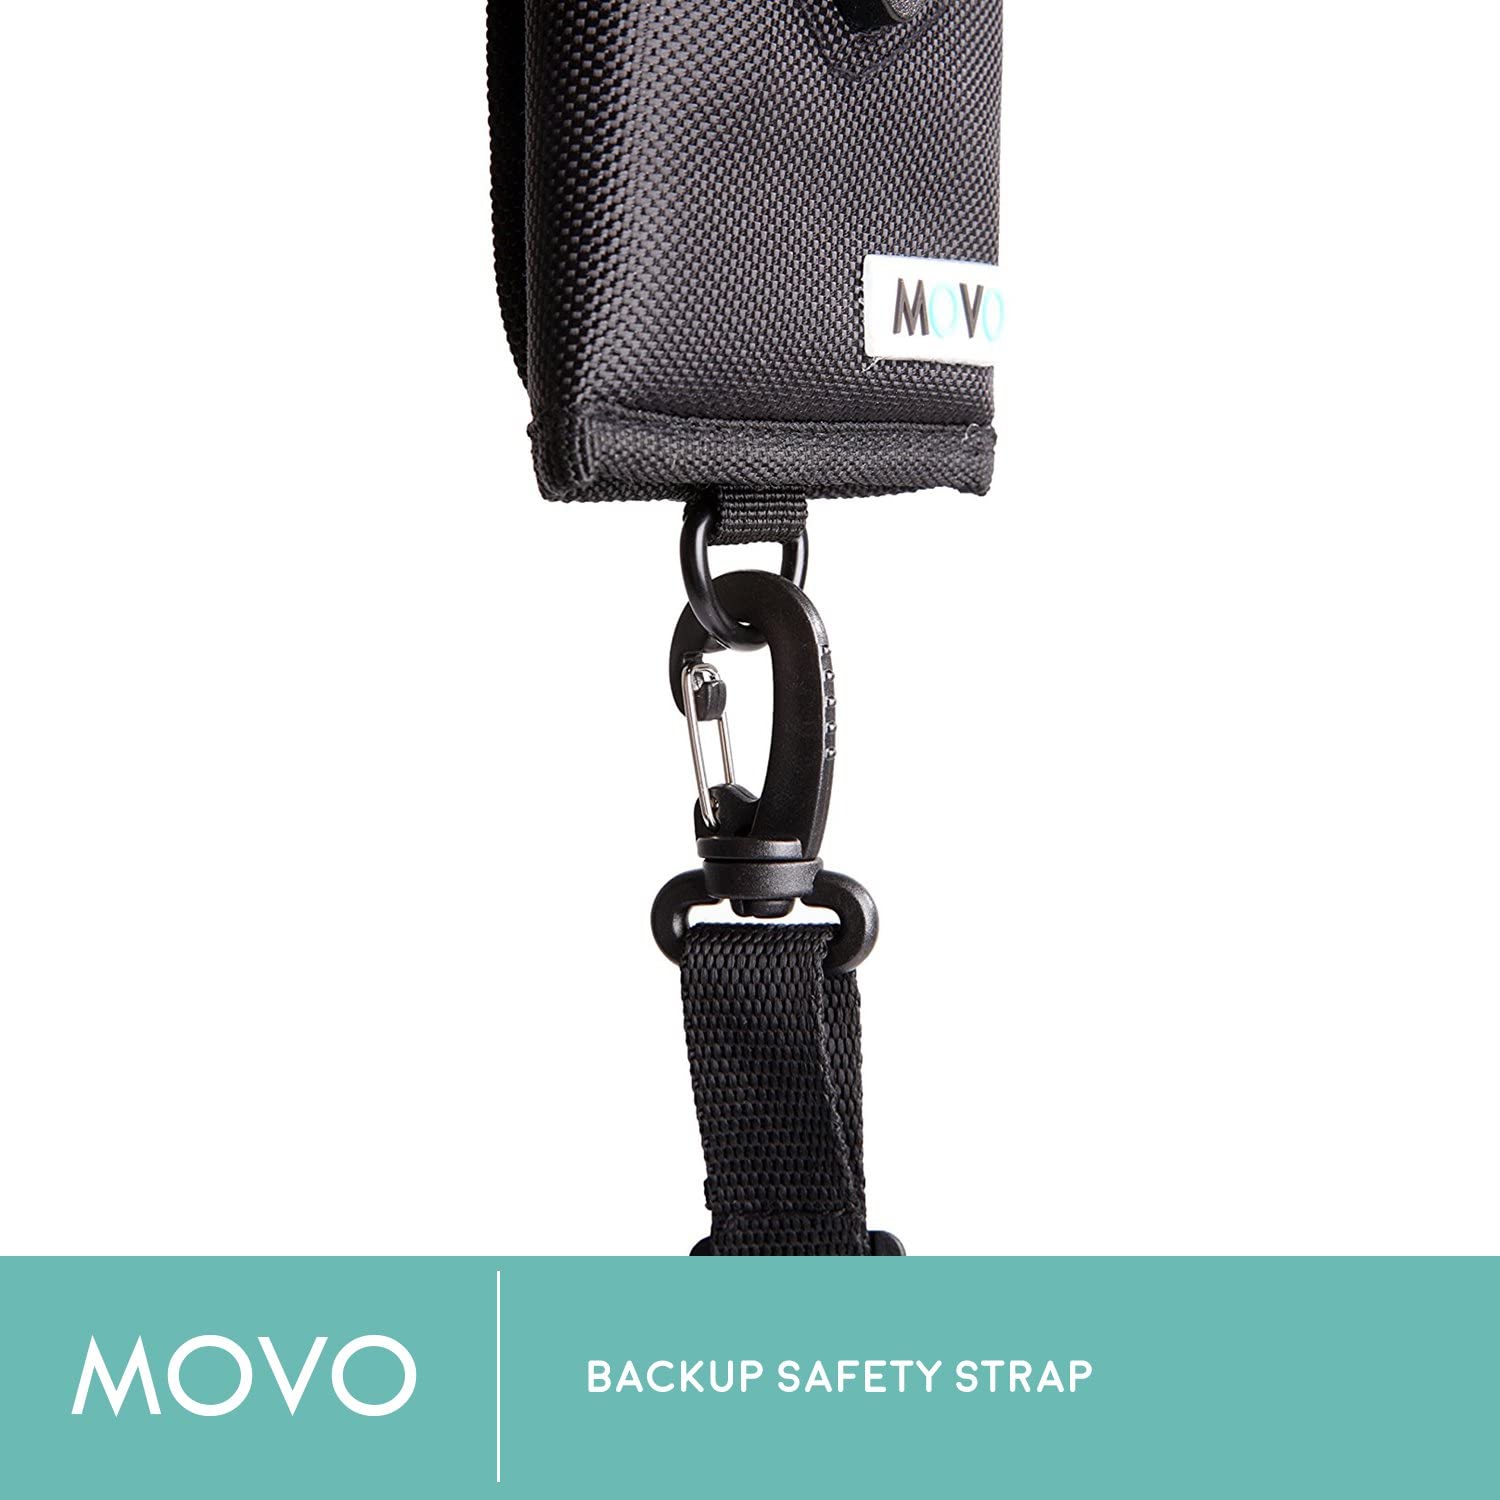 Movo Photo MB200 Universal Camera Holster Attachment System for Backpacks and... 